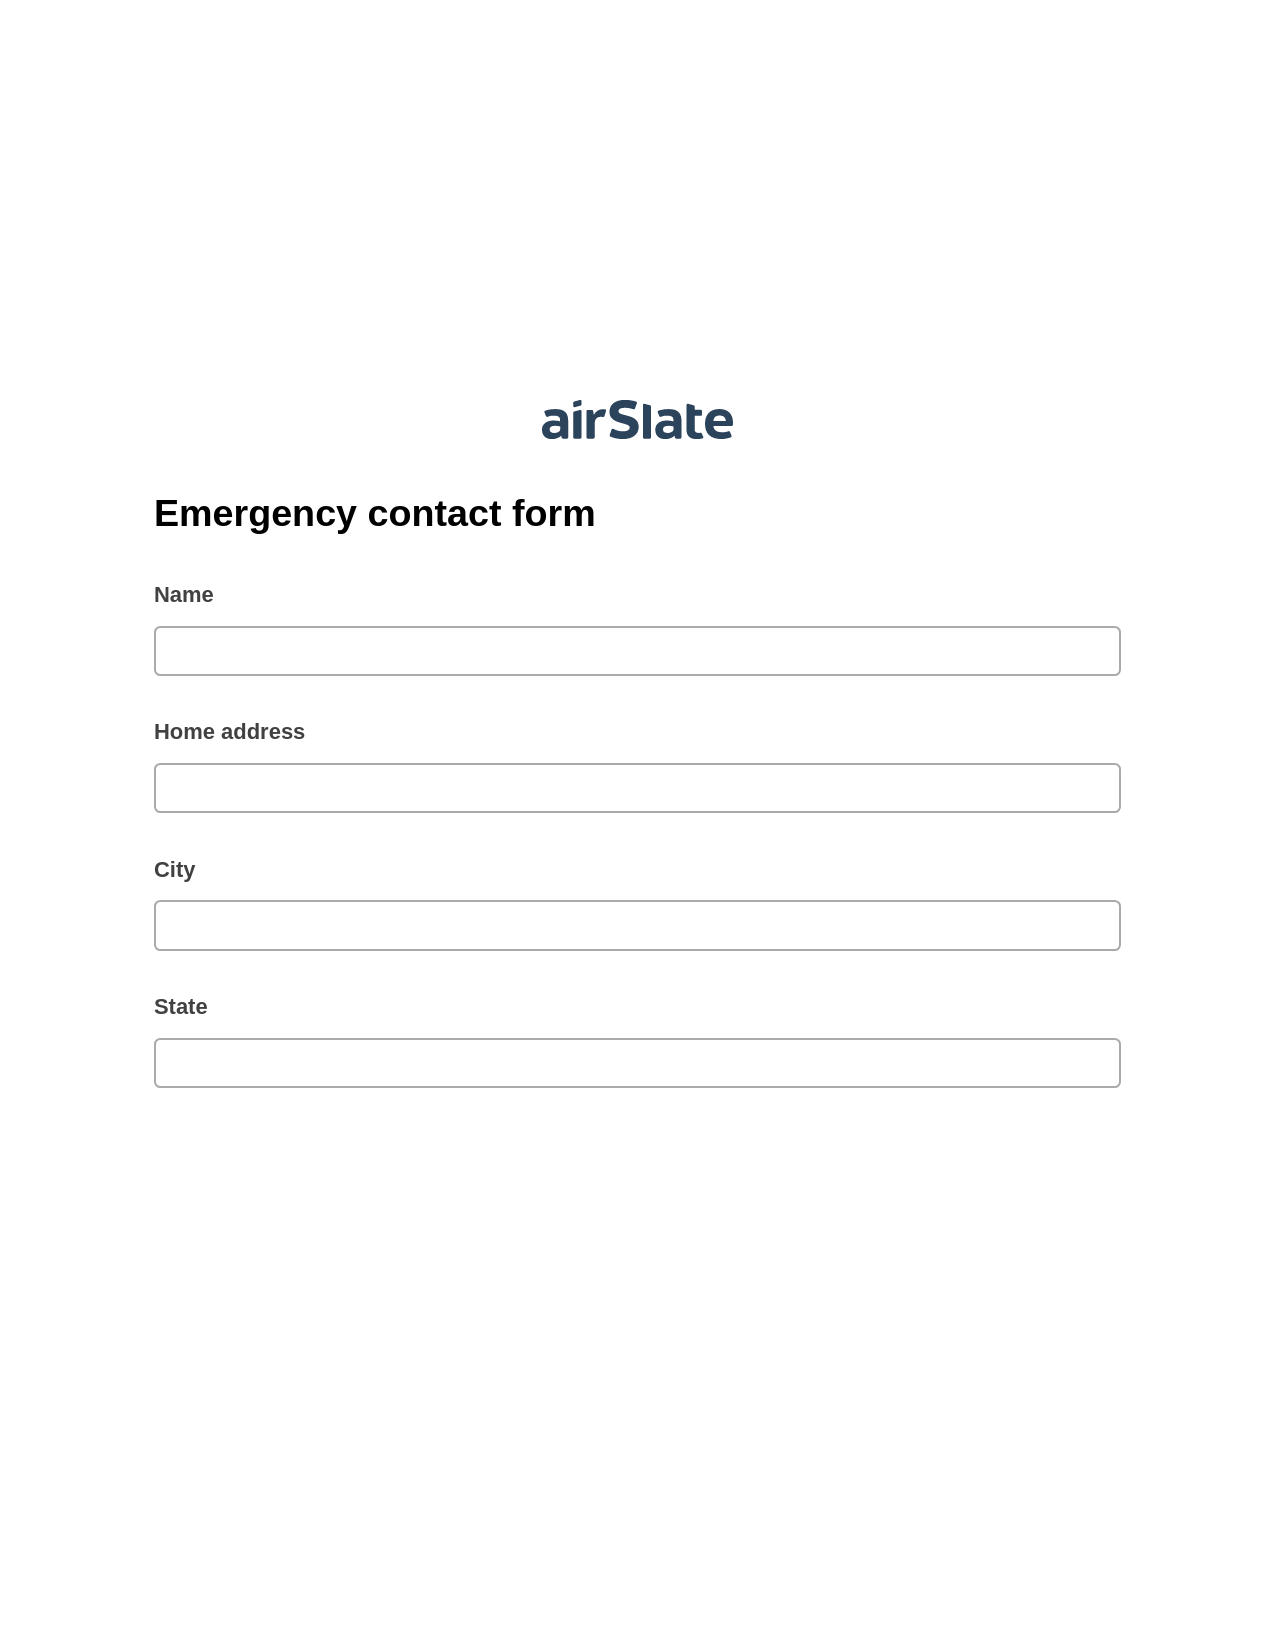 Emergency contact form Pre-fill Slate from MS Dynamics 365 Records Bot, Export to MS Dynamics 365 Bot, Box Bot